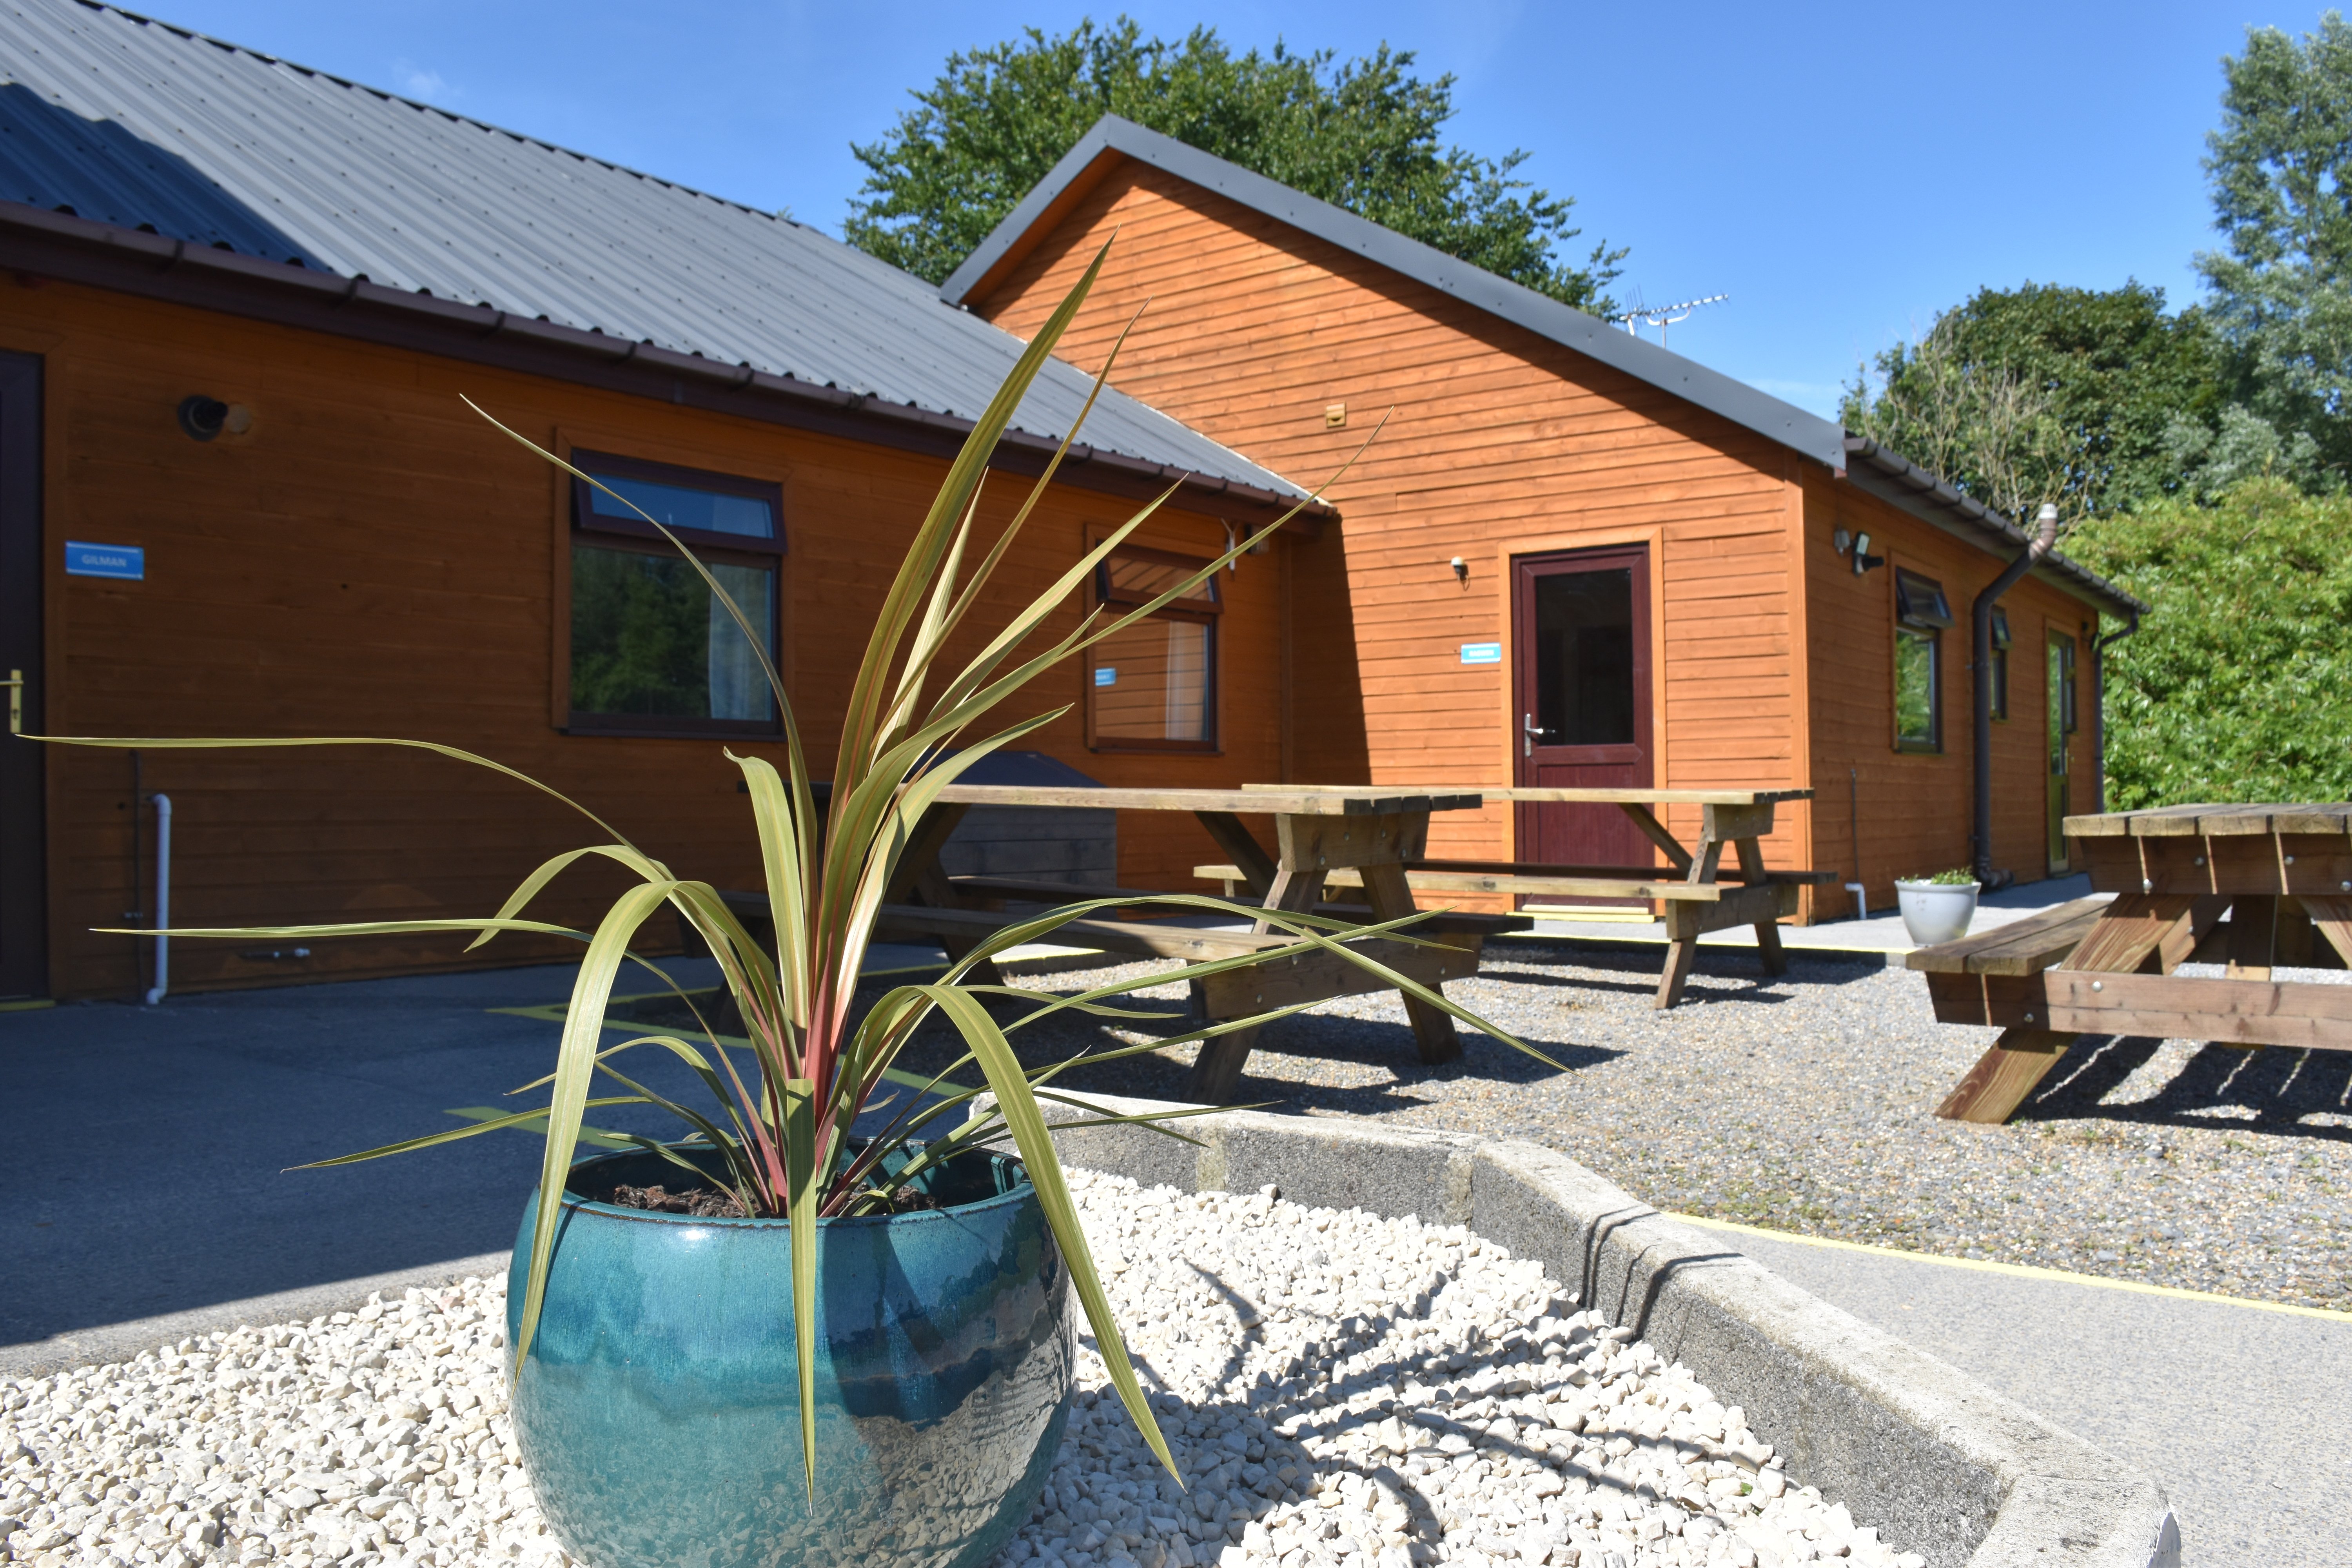 Morfa Bay Adventure - bunkhouse accommodation with outside picnic benches